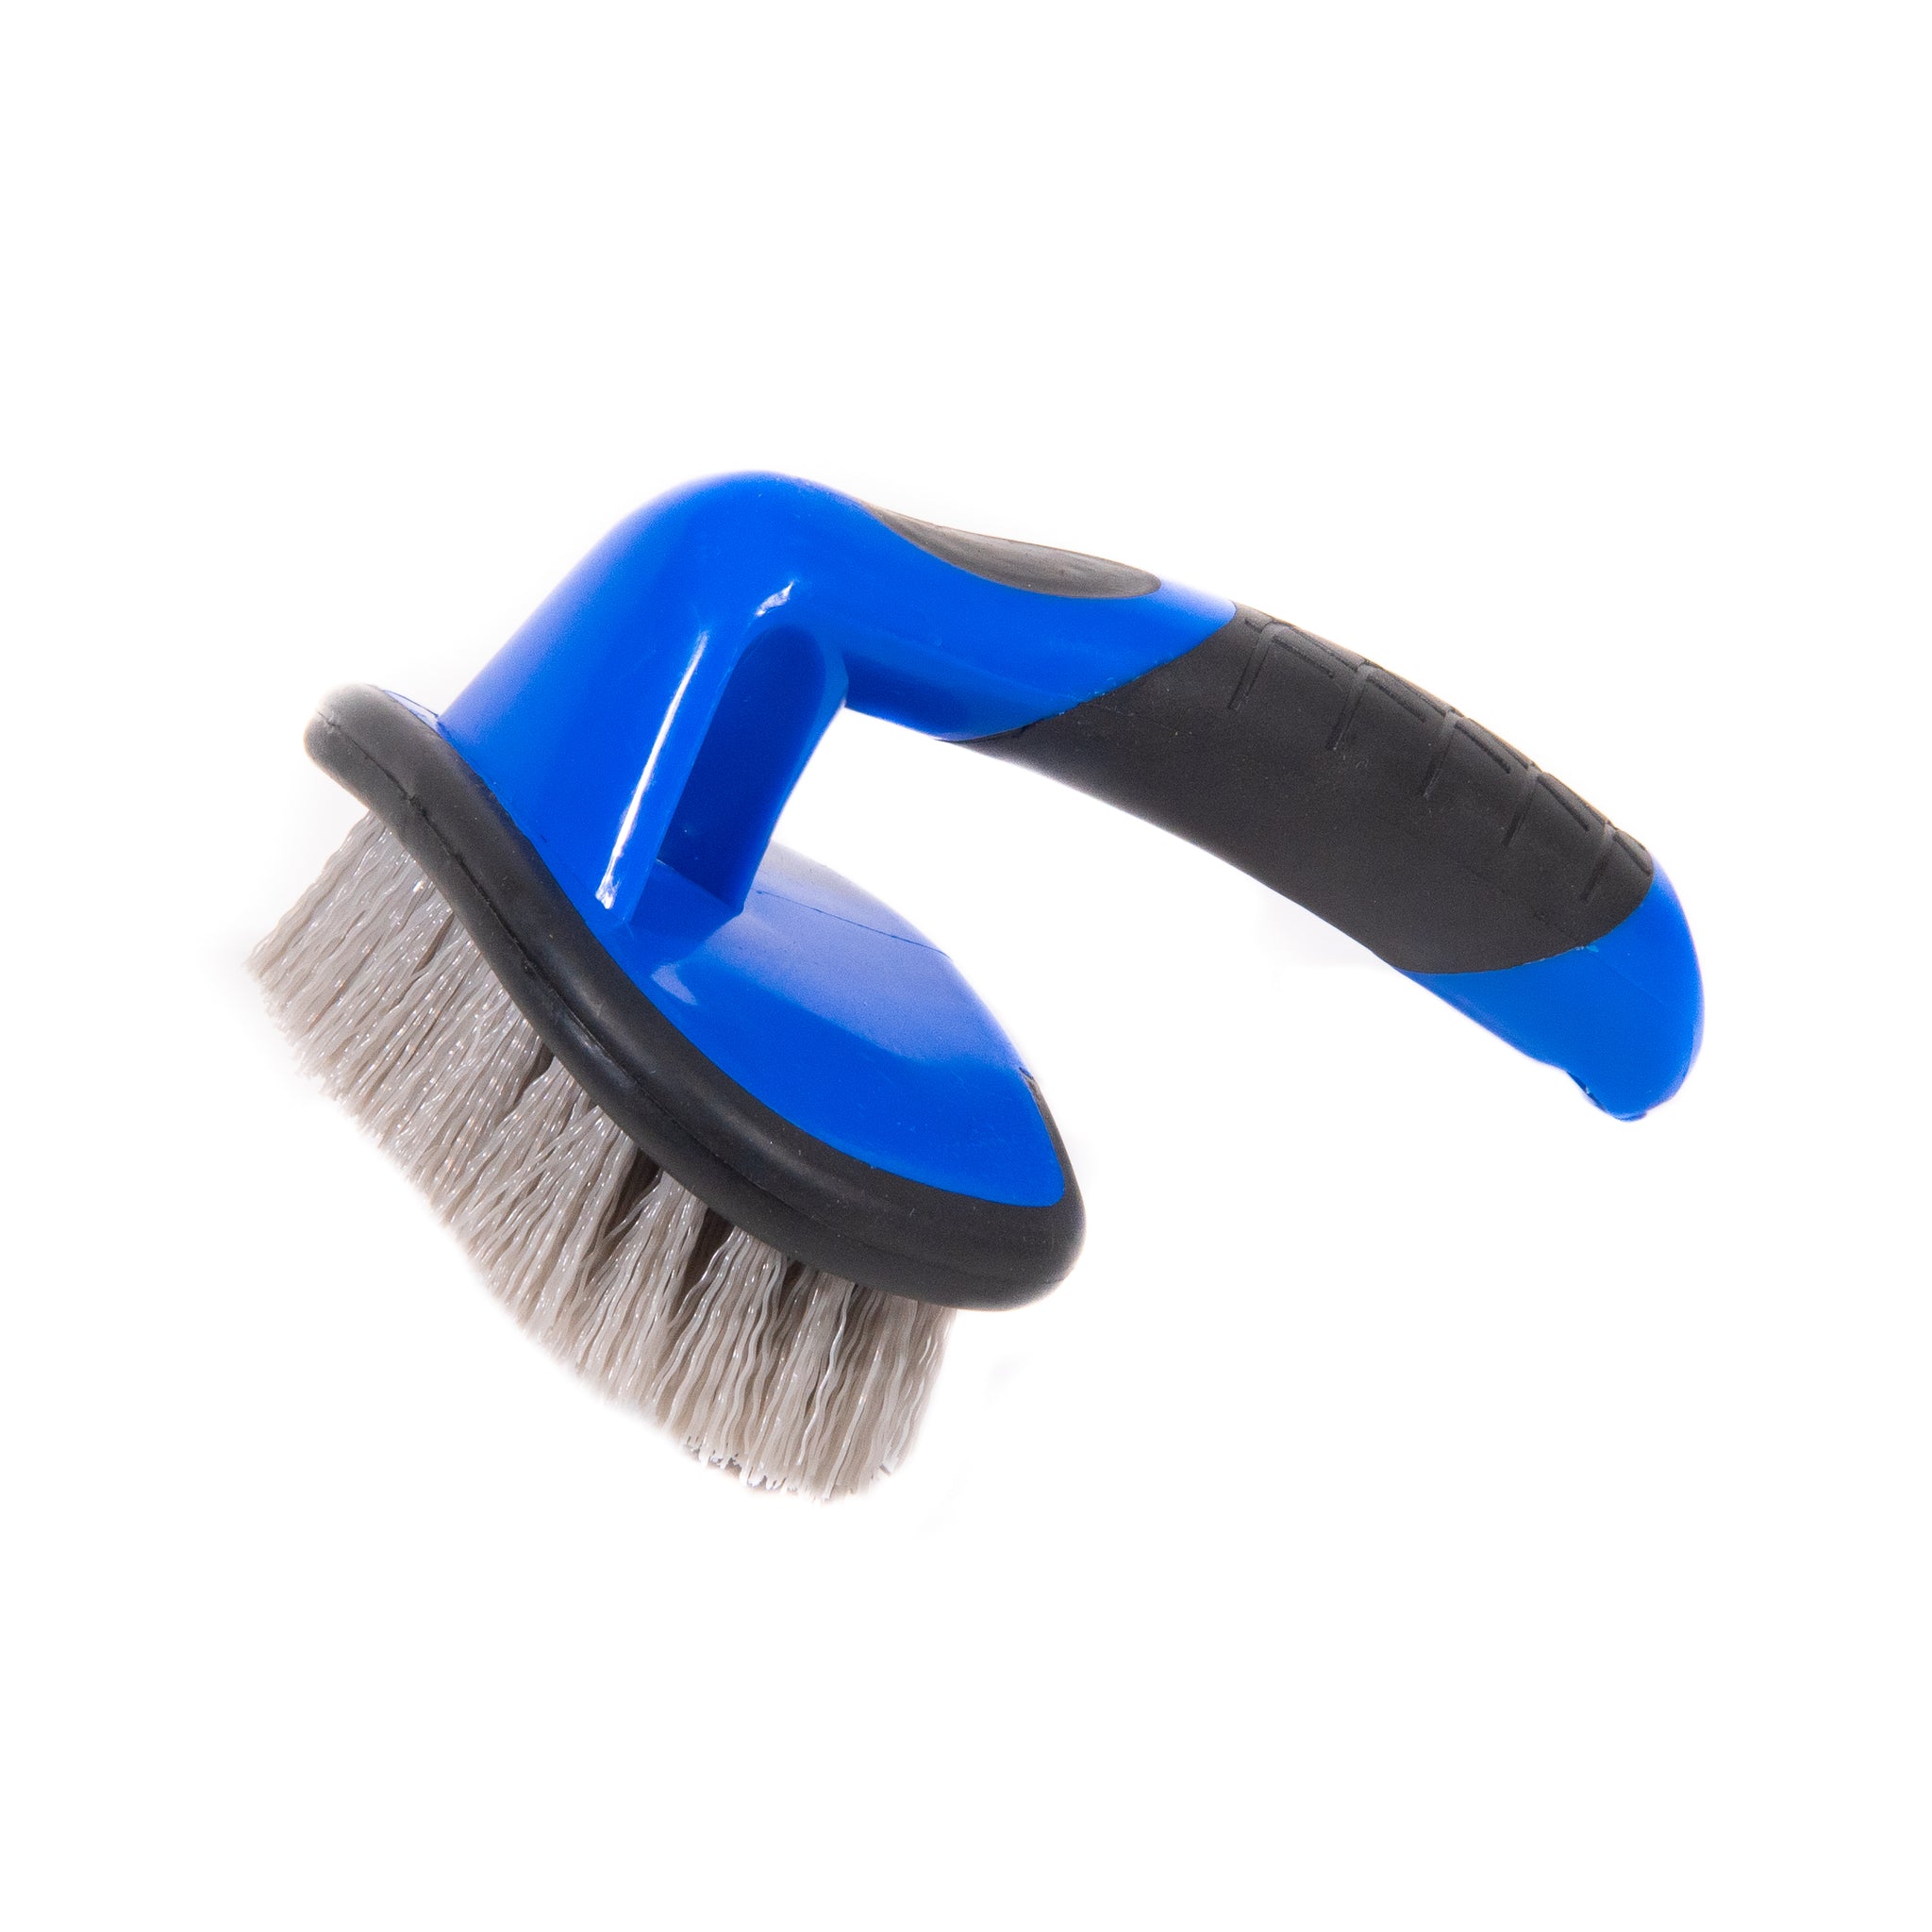 Tire & Wheel Cleaning Brush Combo Set with Soft Gentle Feather